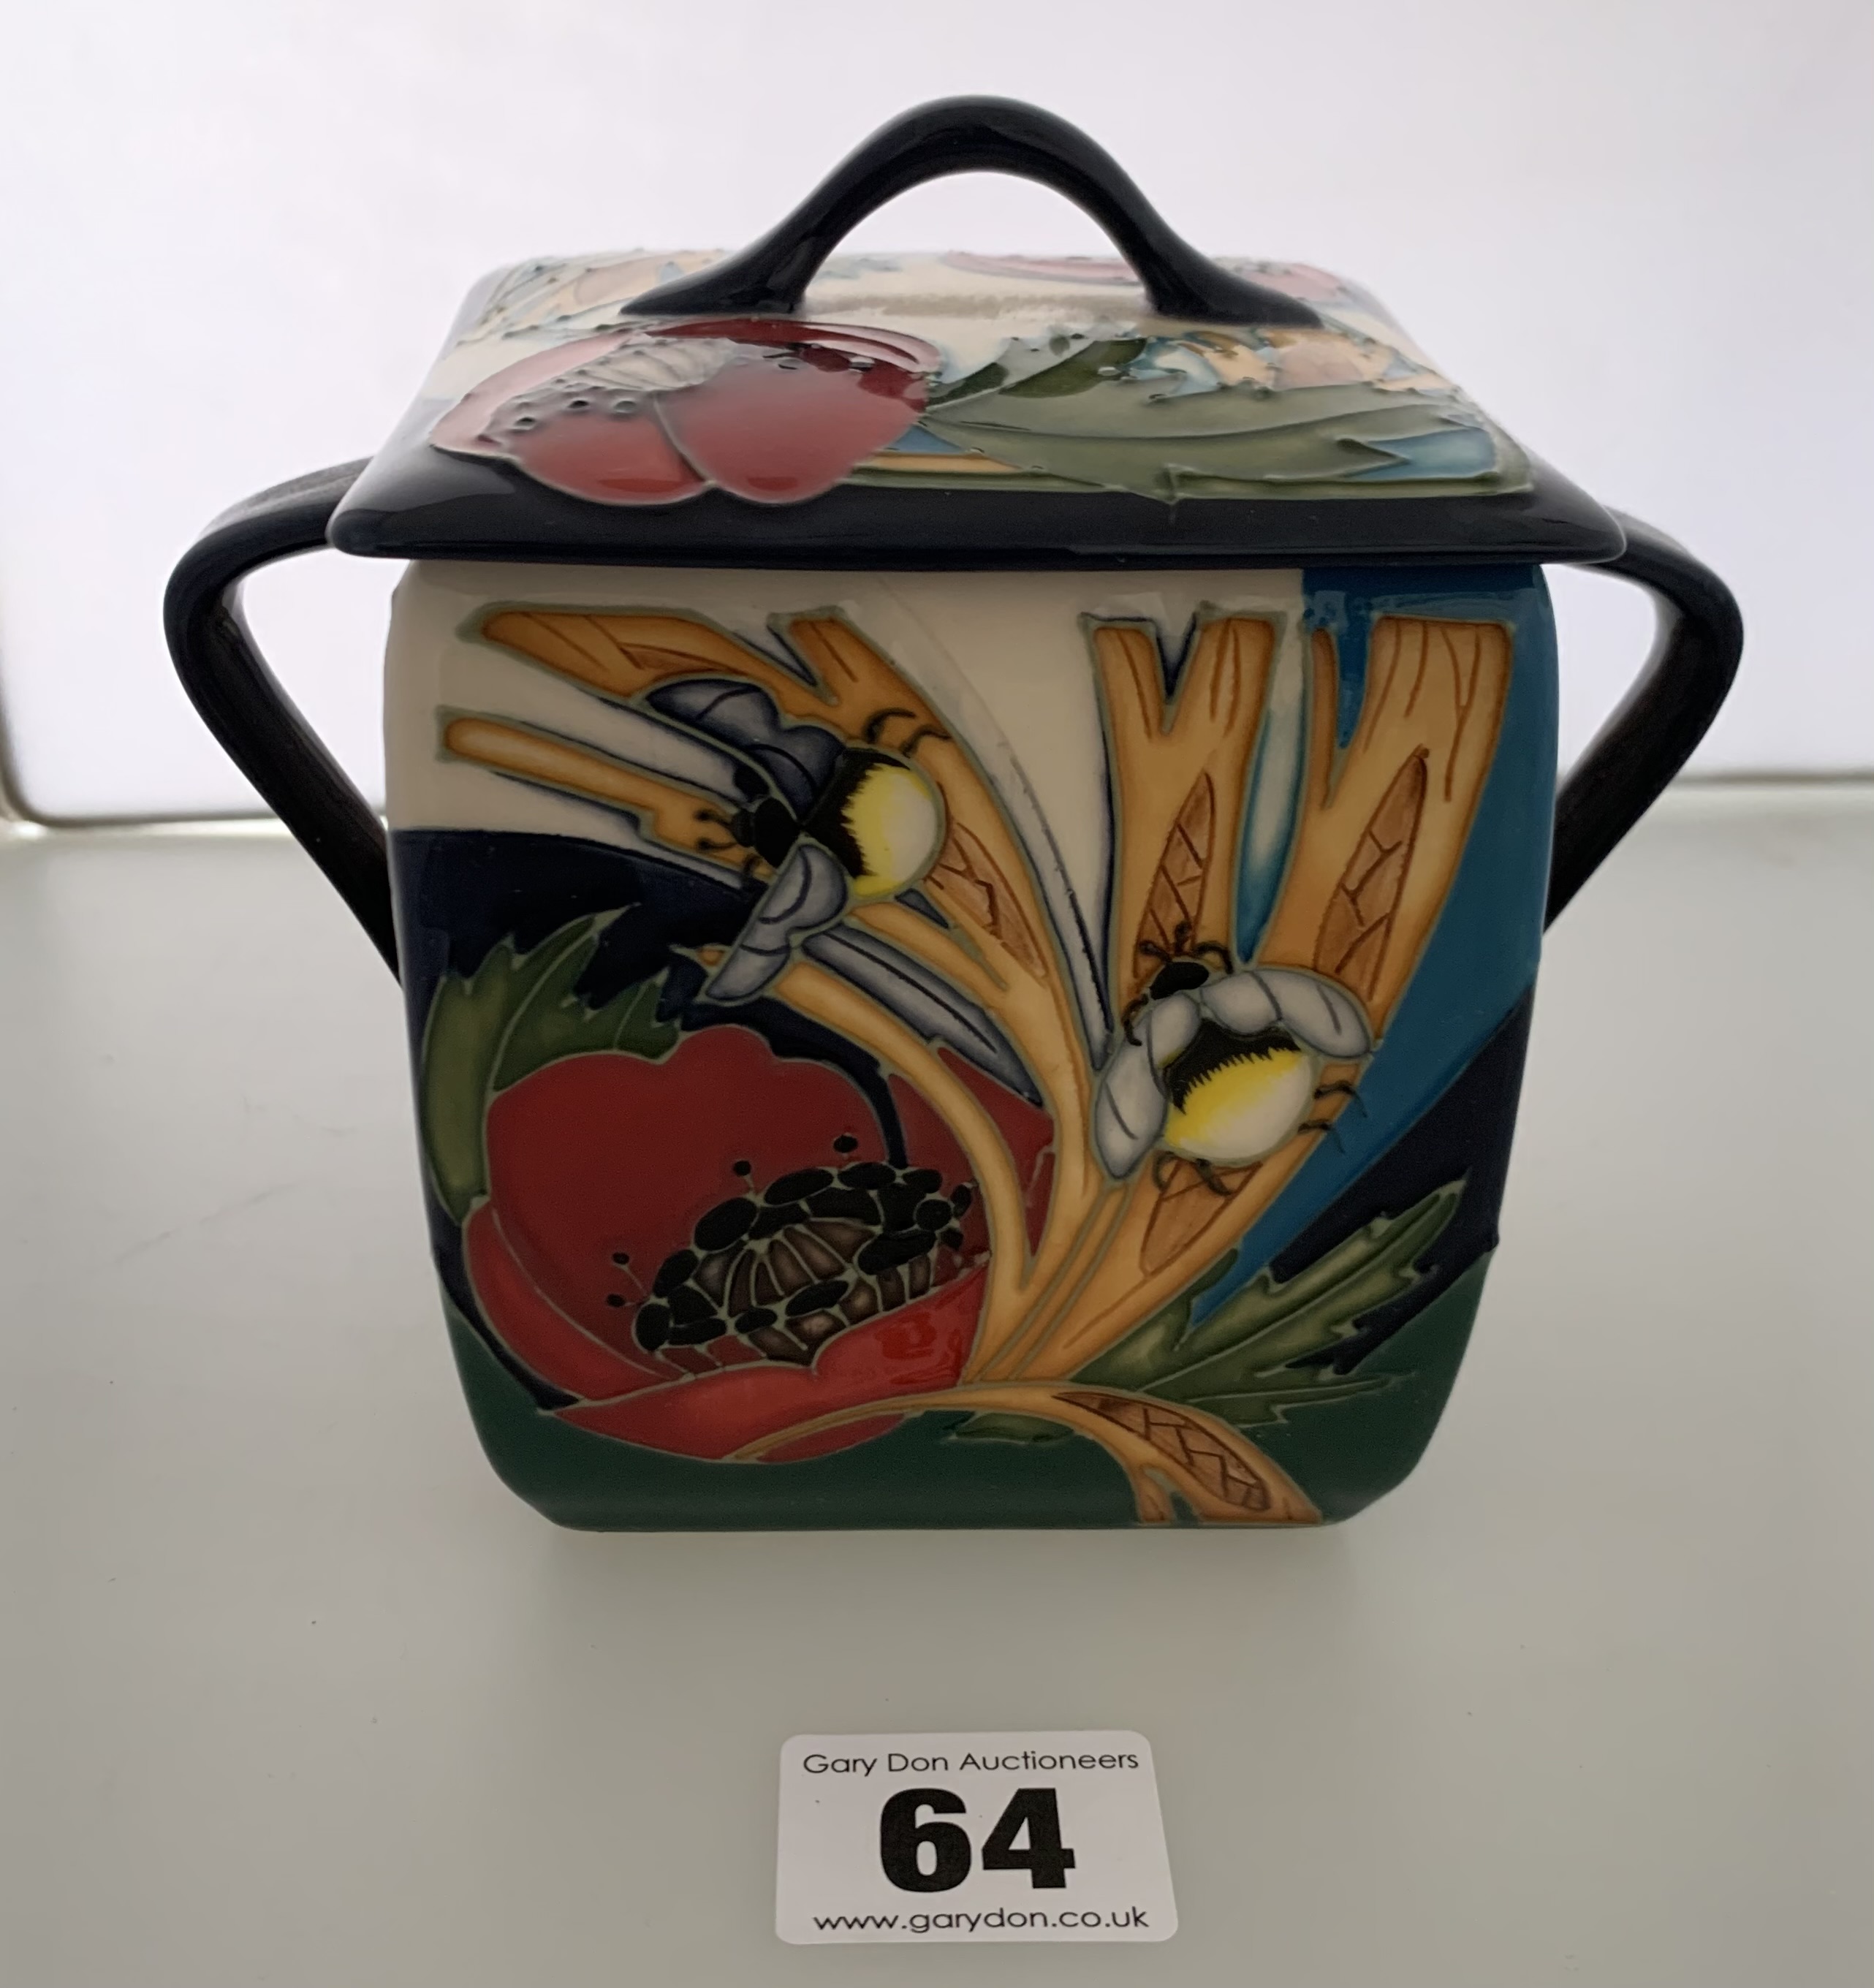 Square lidded Moorcroft jar, signed and dated 2012, 43/100, 5” high x 7” wide - Image 4 of 6